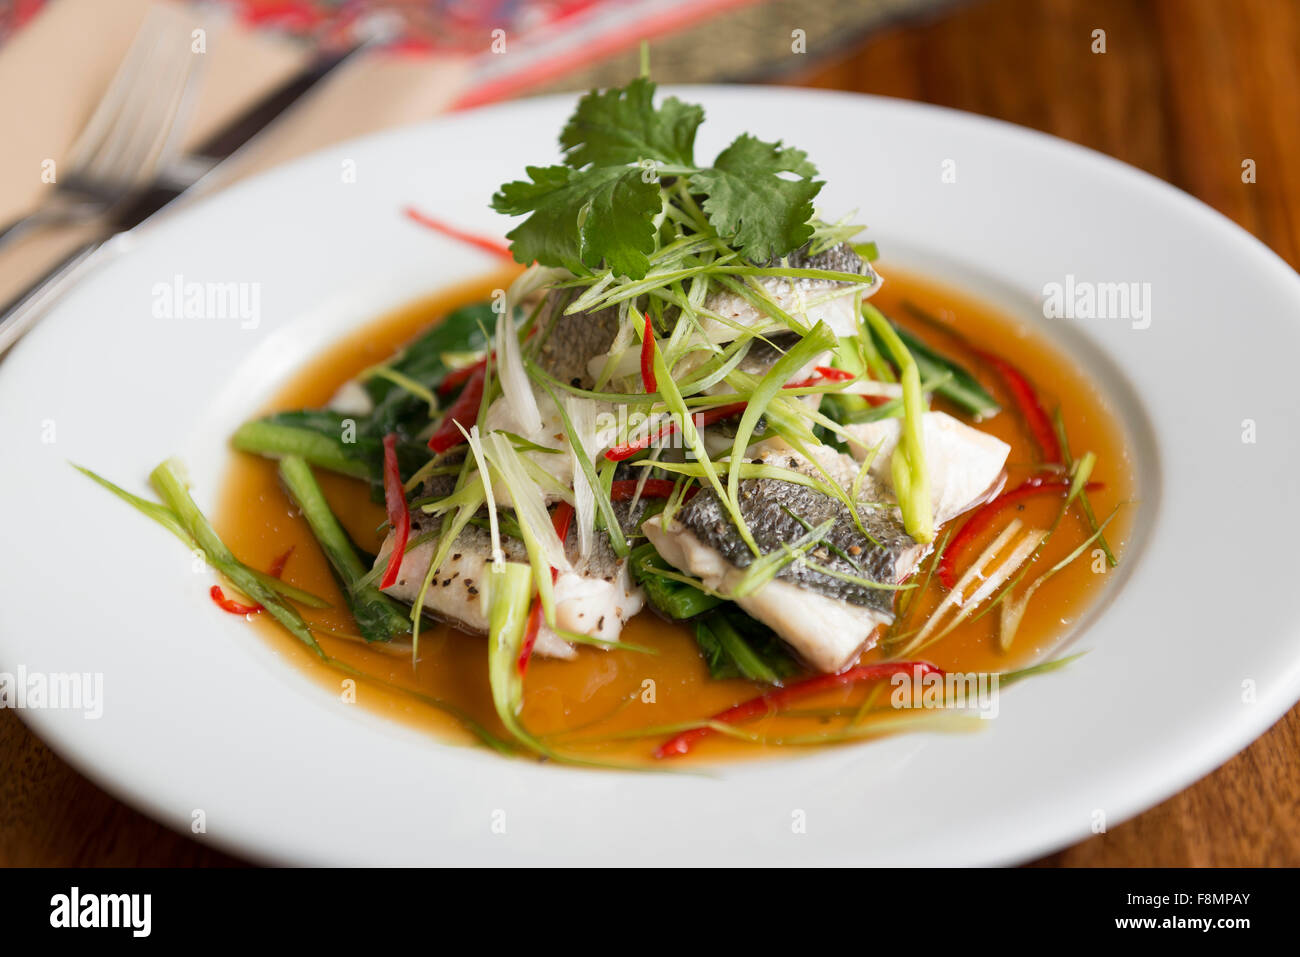 Singapore cuisine served in a restaurant. Fish. Stock Photo